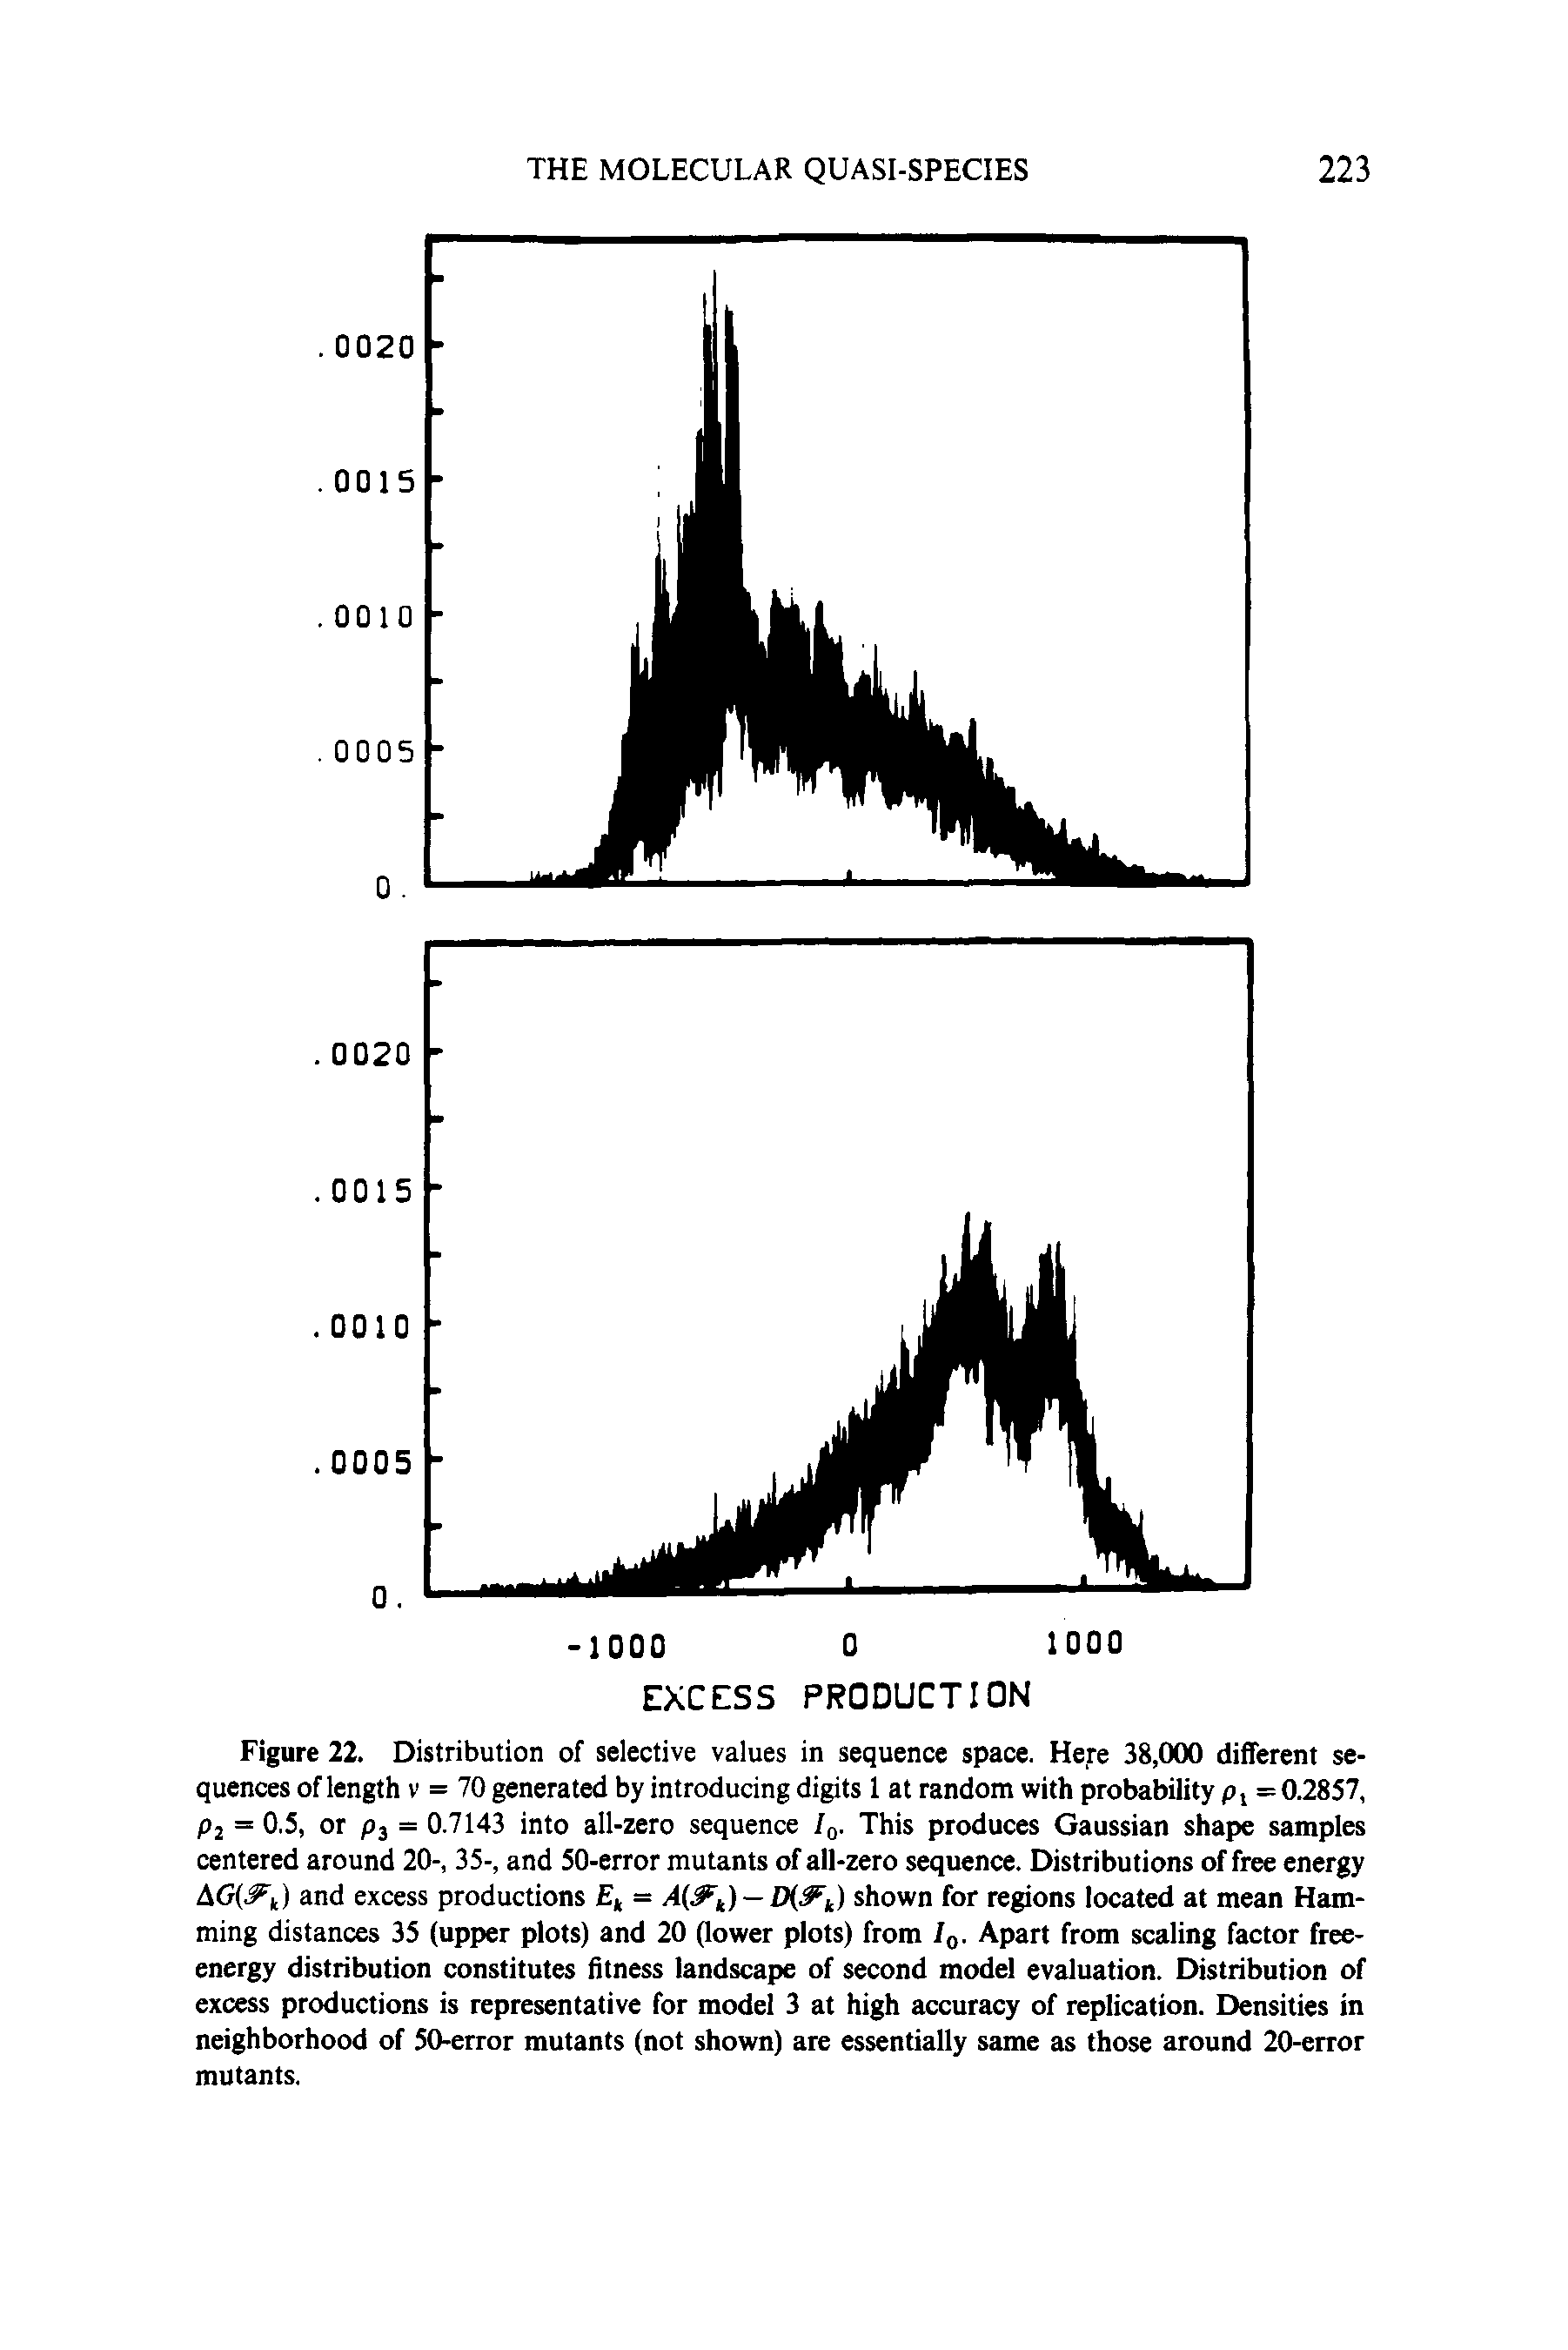 Figure 22. Distribution of selective values in sequence space. Here 38,000 different sequences of length V = 70 generated by introducing digits 1 at random with probabiiity p i = 0.2857, P2 = 0.5, or P3 = 0.7143 into all-zero sequence /q- This produces Gaussian shape samples centered around 20-, 35-, and 50-error mutants of all-zero sequence. Distributions of free energy AG(. k) and excess productions — shown for regions located at mean Ham-...